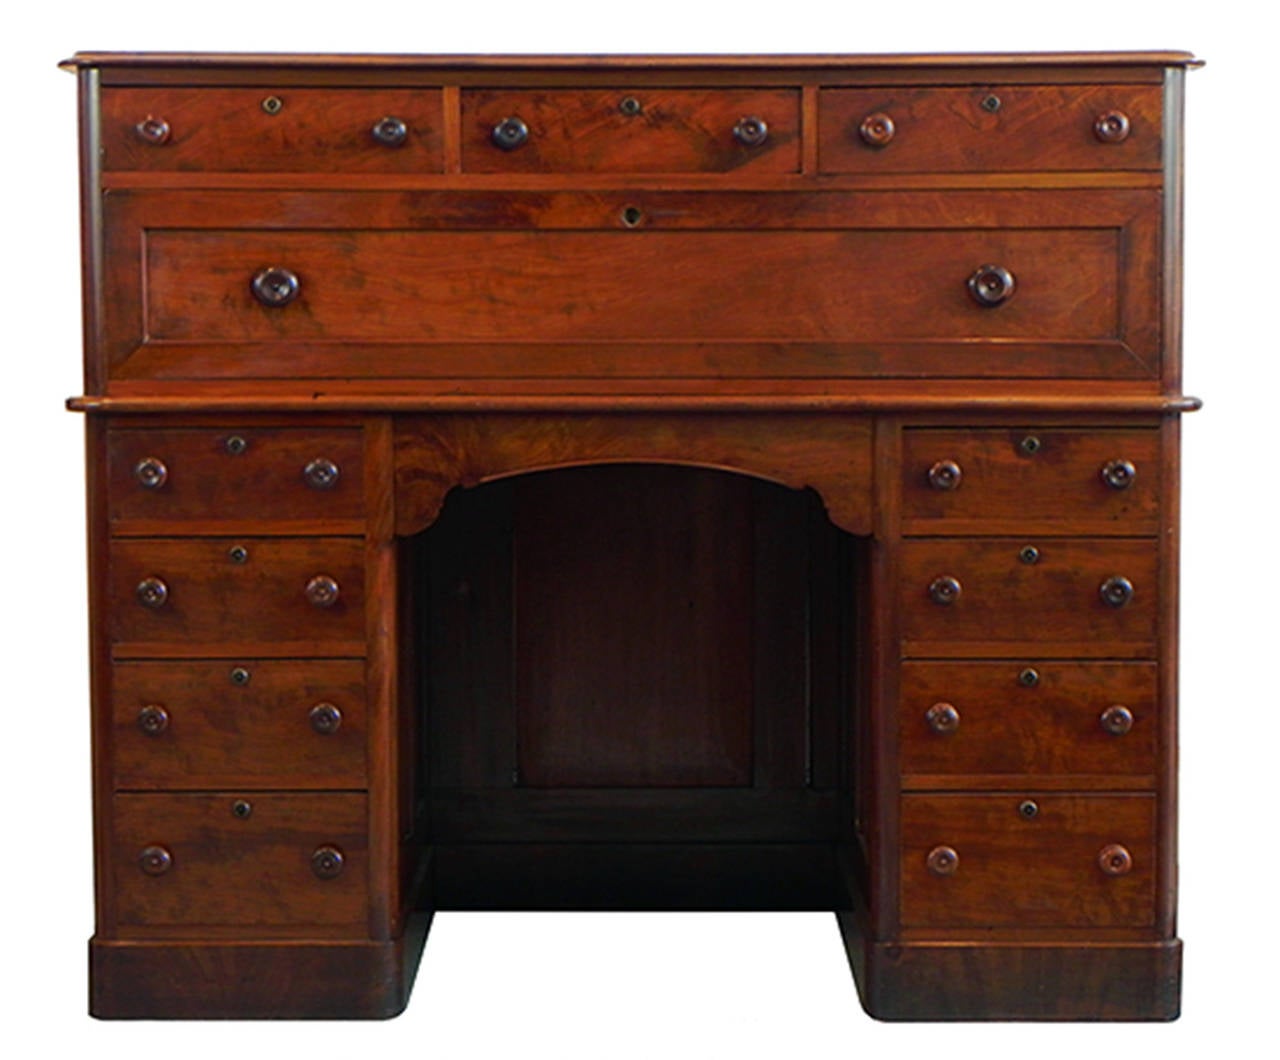 This unique mahogany pedestal base secretary or desk was described in an ad by Smith as “bank and counting room furniture” and is a rare example of the Boston Empire style. This desk belonged to whaling financier, Charles W. Morgan of New Bedford,